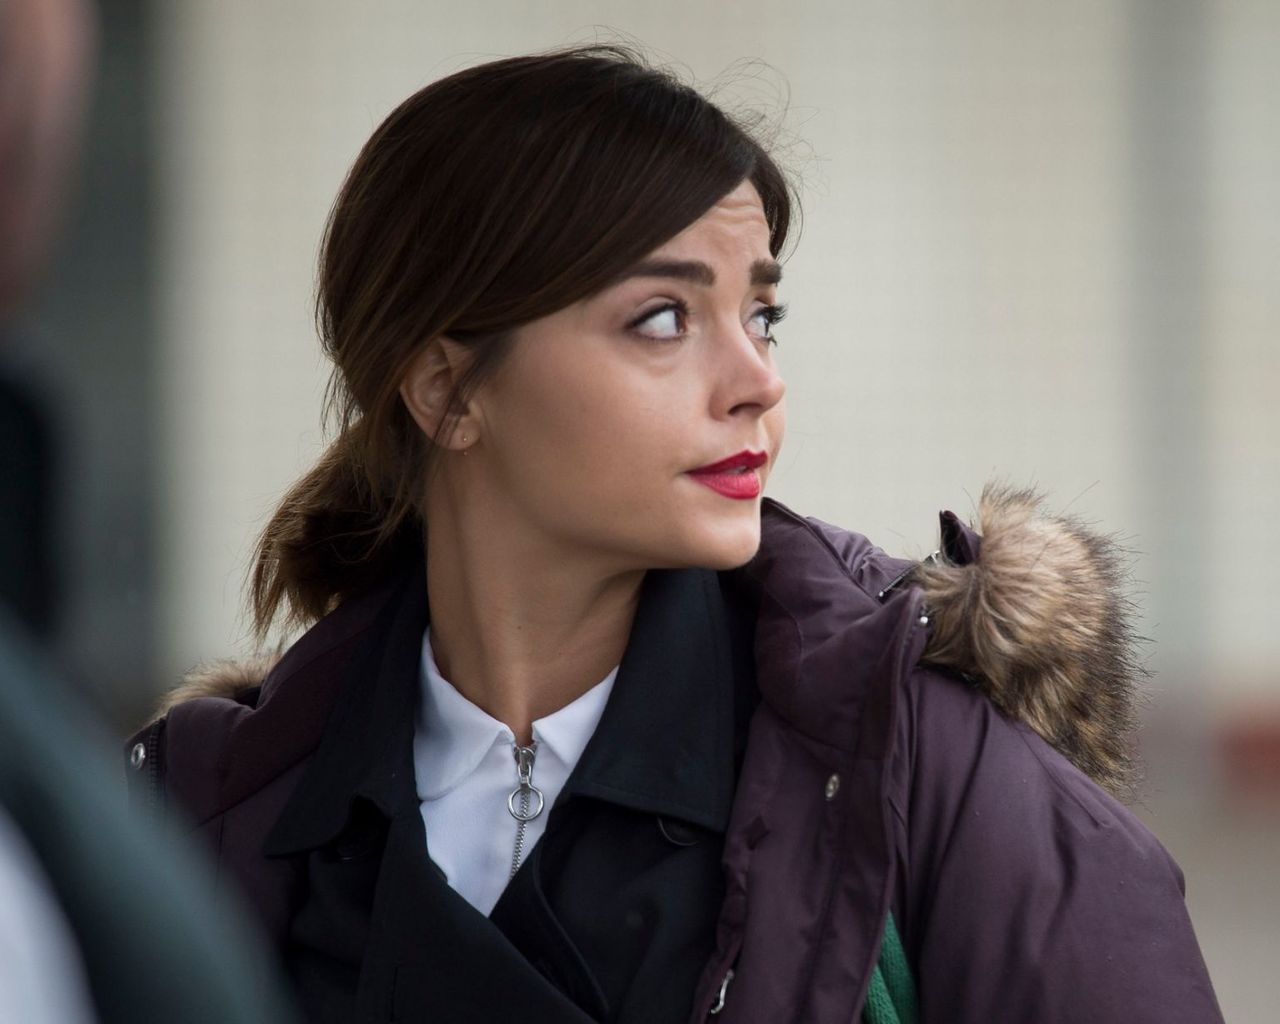 Jenna Coleman from Doctor Who for 1280 x 1024 resolution